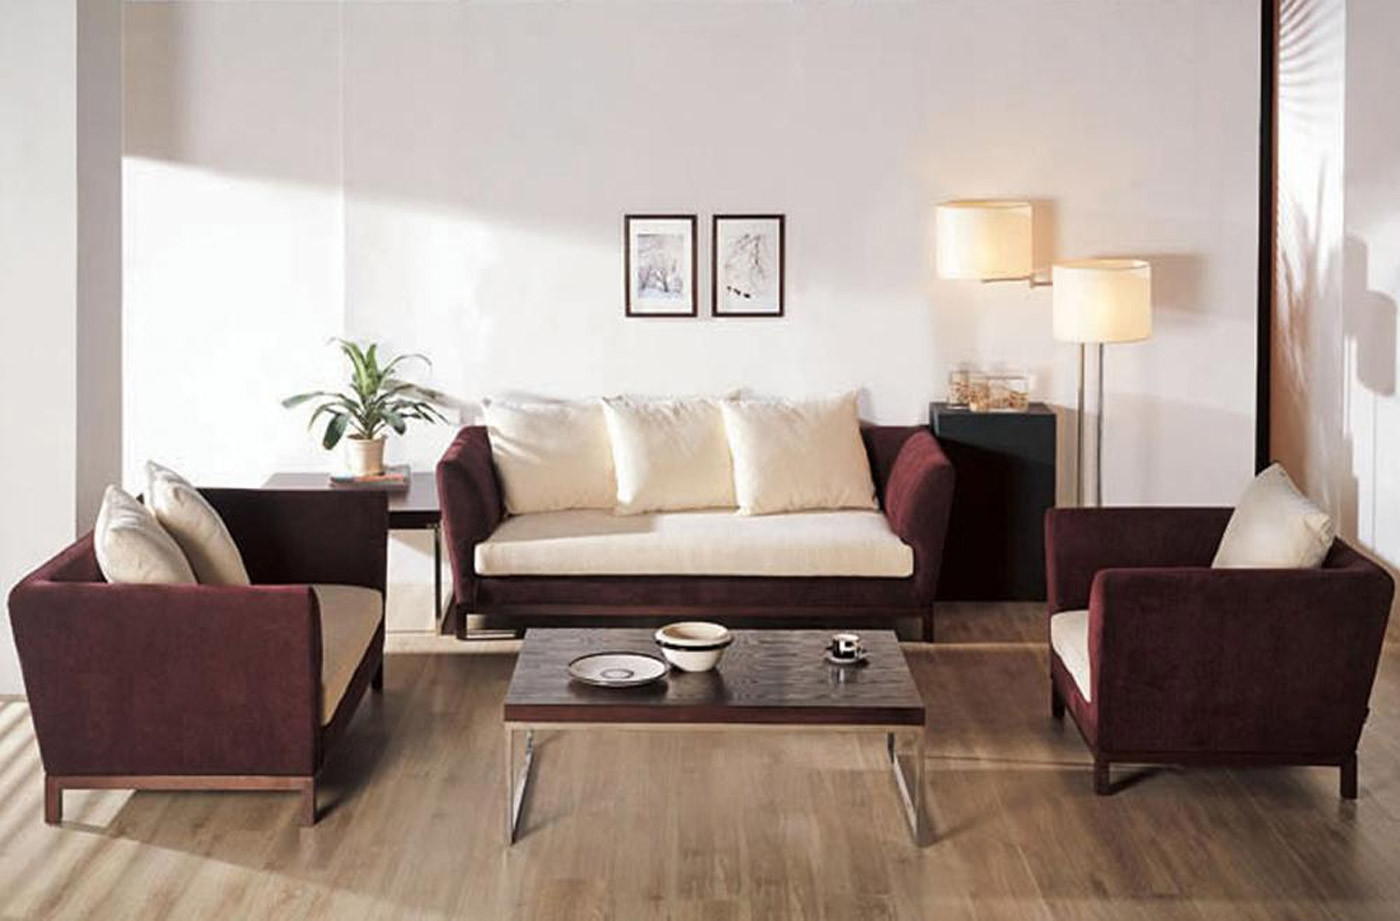 Modern Living Room Furniture
 Find Suitable Living Room Furniture With Your Style